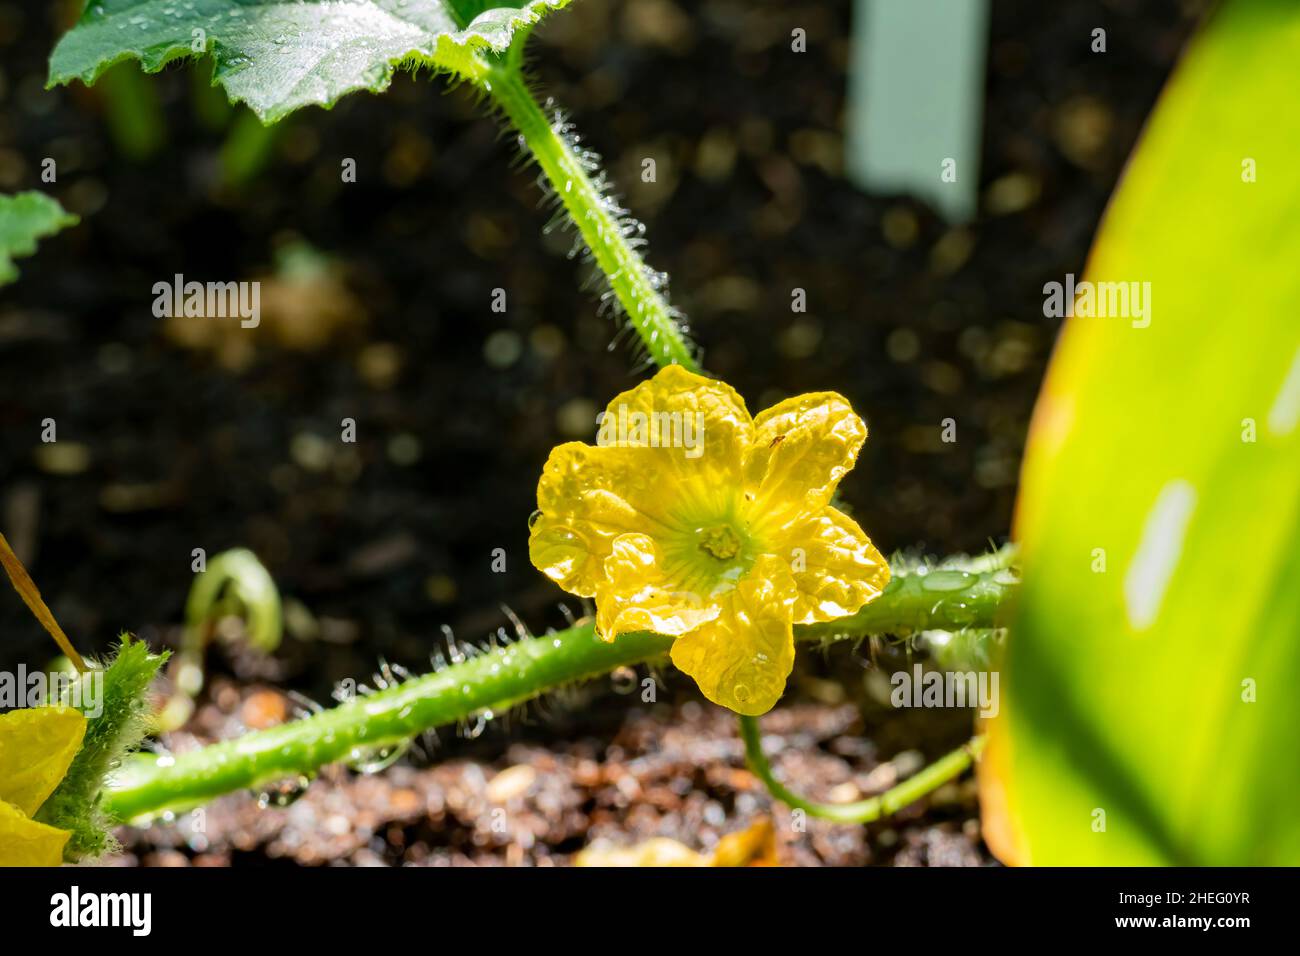 Close up shot of a melon flower in farm garden at Los Angeles Stock Photo